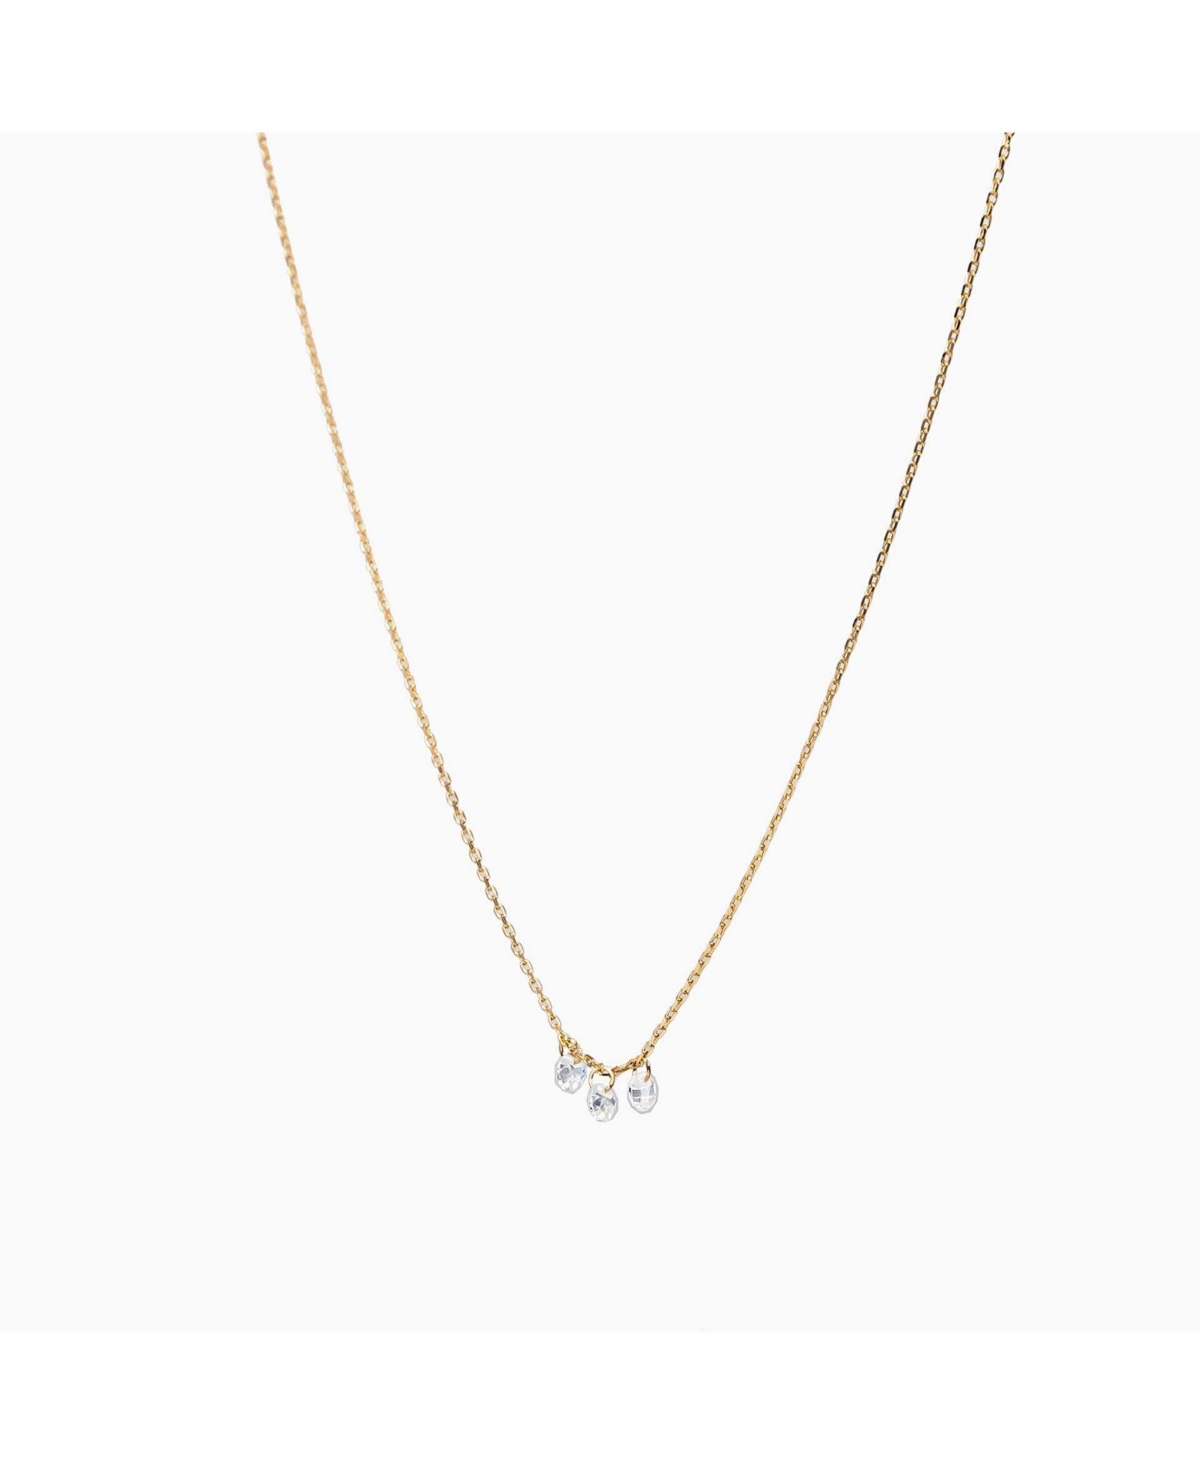 Emmeline Necklace - Yellow gold